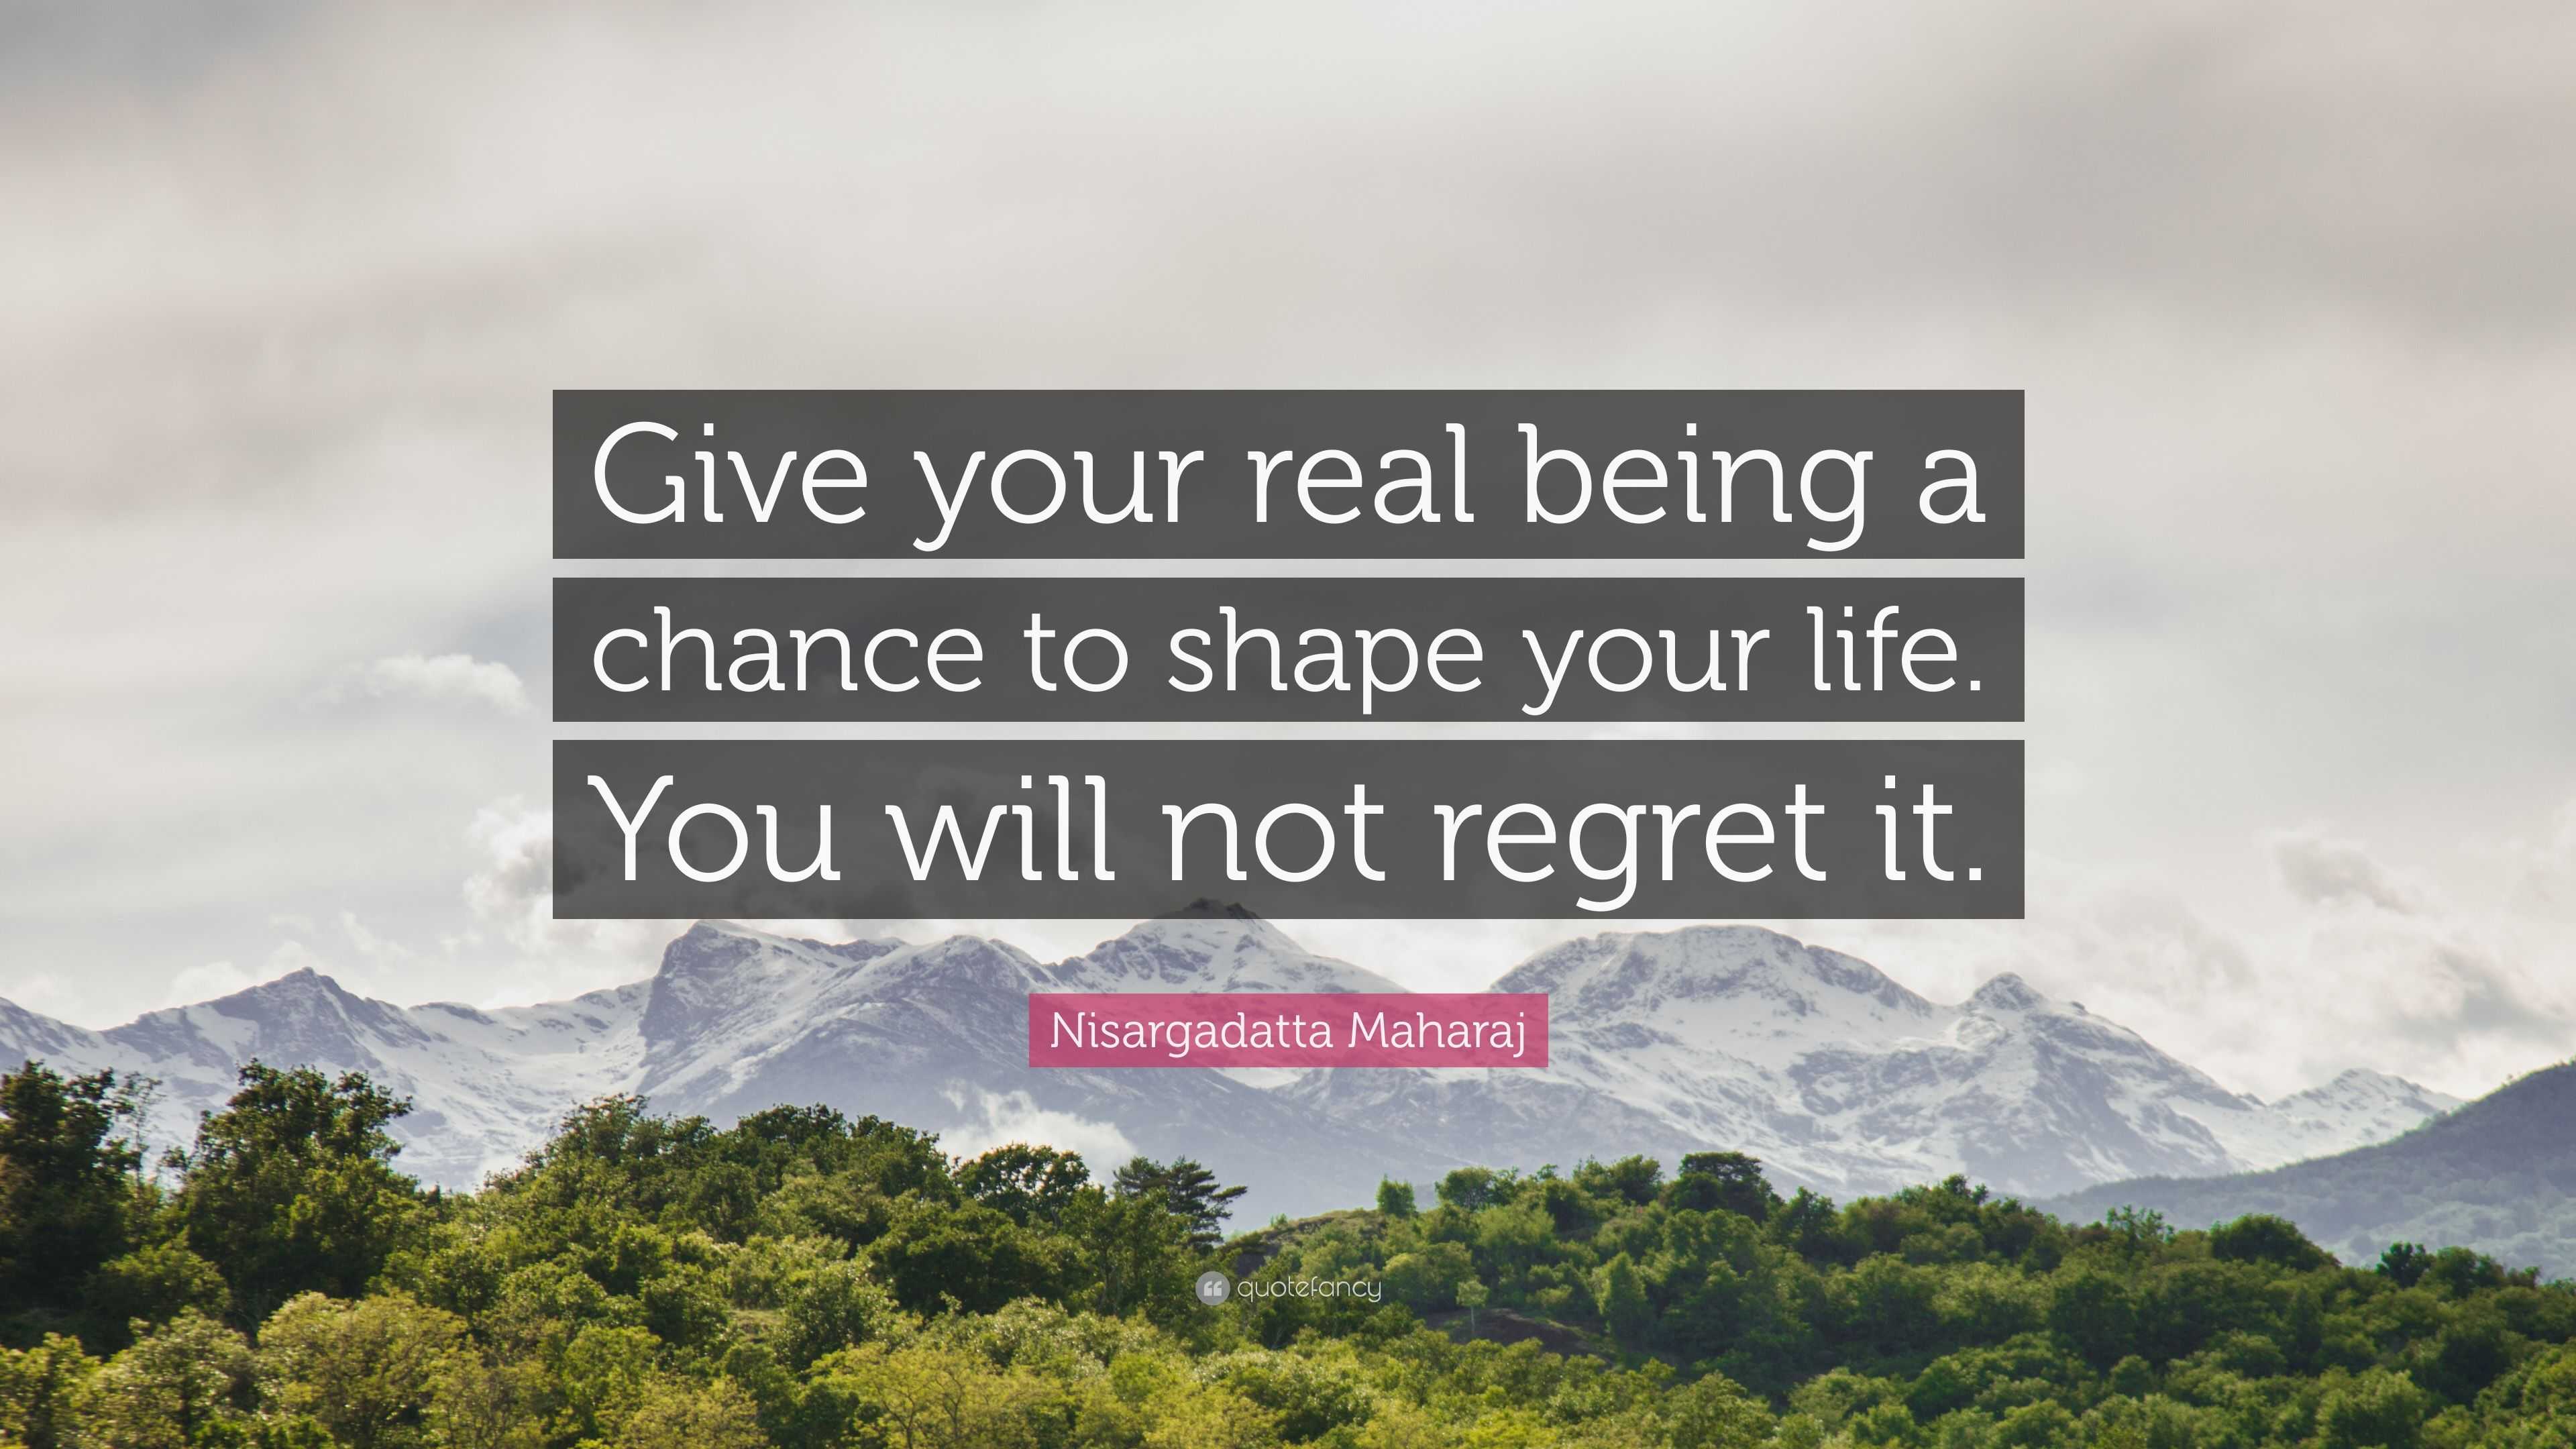 Nisargadatta Maharaj Quote: “Give your real being a chance to shape your  life. You will not